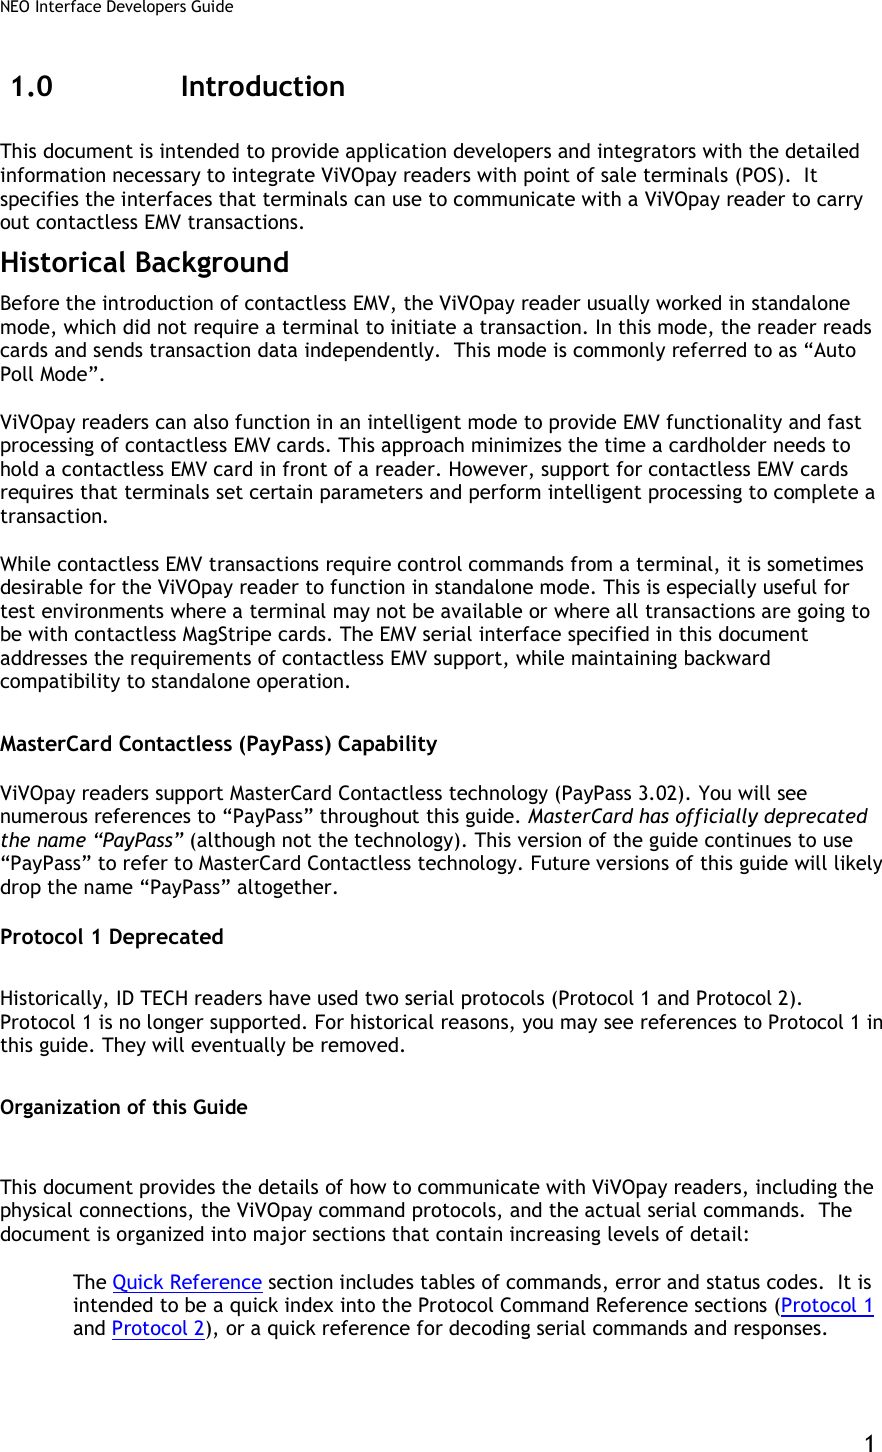 NEO Interface Developers Guide           1 1.0 Introduction This document is intended to provide application developers and integrators with the detailed information necessary to integrate ViVOpay readers with point of sale terminals (POS).  It specifies the interfaces that terminals can use to communicate with a ViVOpay reader to carry out contactless EMV transactions.  Historical Background Before the introduction of contactless EMV, the ViVOpay reader usually worked in standalone mode, which did not require a terminal to initiate a transaction. In this mode, the reader reads cards and sends transaction data independently.  This mode is commonly referred to as “Auto Poll Mode”. ViVOpay readers can also function in an intelligent mode to provide EMV functionality and fast processing of contactless EMV cards. This approach minimizes the time a cardholder needs to hold a contactless EMV card in front of a reader. However, support for contactless EMV cards requires that terminals set certain parameters and perform intelligent processing to complete a transaction.  While contactless EMV transactions require control commands from a terminal, it is sometimes desirable for the ViVOpay reader to function in standalone mode. This is especially useful for test environments where a terminal may not be available or where all transactions are going to be with contactless MagStripe cards. The EMV serial interface specified in this document addresses the requirements of contactless EMV support, while maintaining backward compatibility to standalone operation. MasterCard Contactless (PayPass) Capability ViVOpay readers support MasterCard Contactless technology (PayPass 3.02). You will see numerous references to “PayPass” throughout this guide. MasterCard has officially deprecated the name “PayPass” (although not the technology). This version of the guide continues to use “PayPass” to refer to MasterCard Contactless technology. Future versions of this guide will likely drop the name “PayPass” altogether. Protocol 1 Deprecated Historically, ID TECH readers have used two serial protocols (Protocol 1 and Protocol 2). Protocol 1 is no longer supported. For historical reasons, you may see references to Protocol 1 in this guide. They will eventually be removed.  Organization of this Guide This document provides the details of how to communicate with ViVOpay readers, including the physical connections, the ViVOpay command protocols, and the actual serial commands.  The document is organized into major sections that contain increasing levels of detail:  The Quick Reference section includes tables of commands, error and status codes.  It is intended to be a quick index into the Protocol Command Reference sections (Protocol 1 and Protocol 2), or a quick reference for decoding serial commands and responses. 